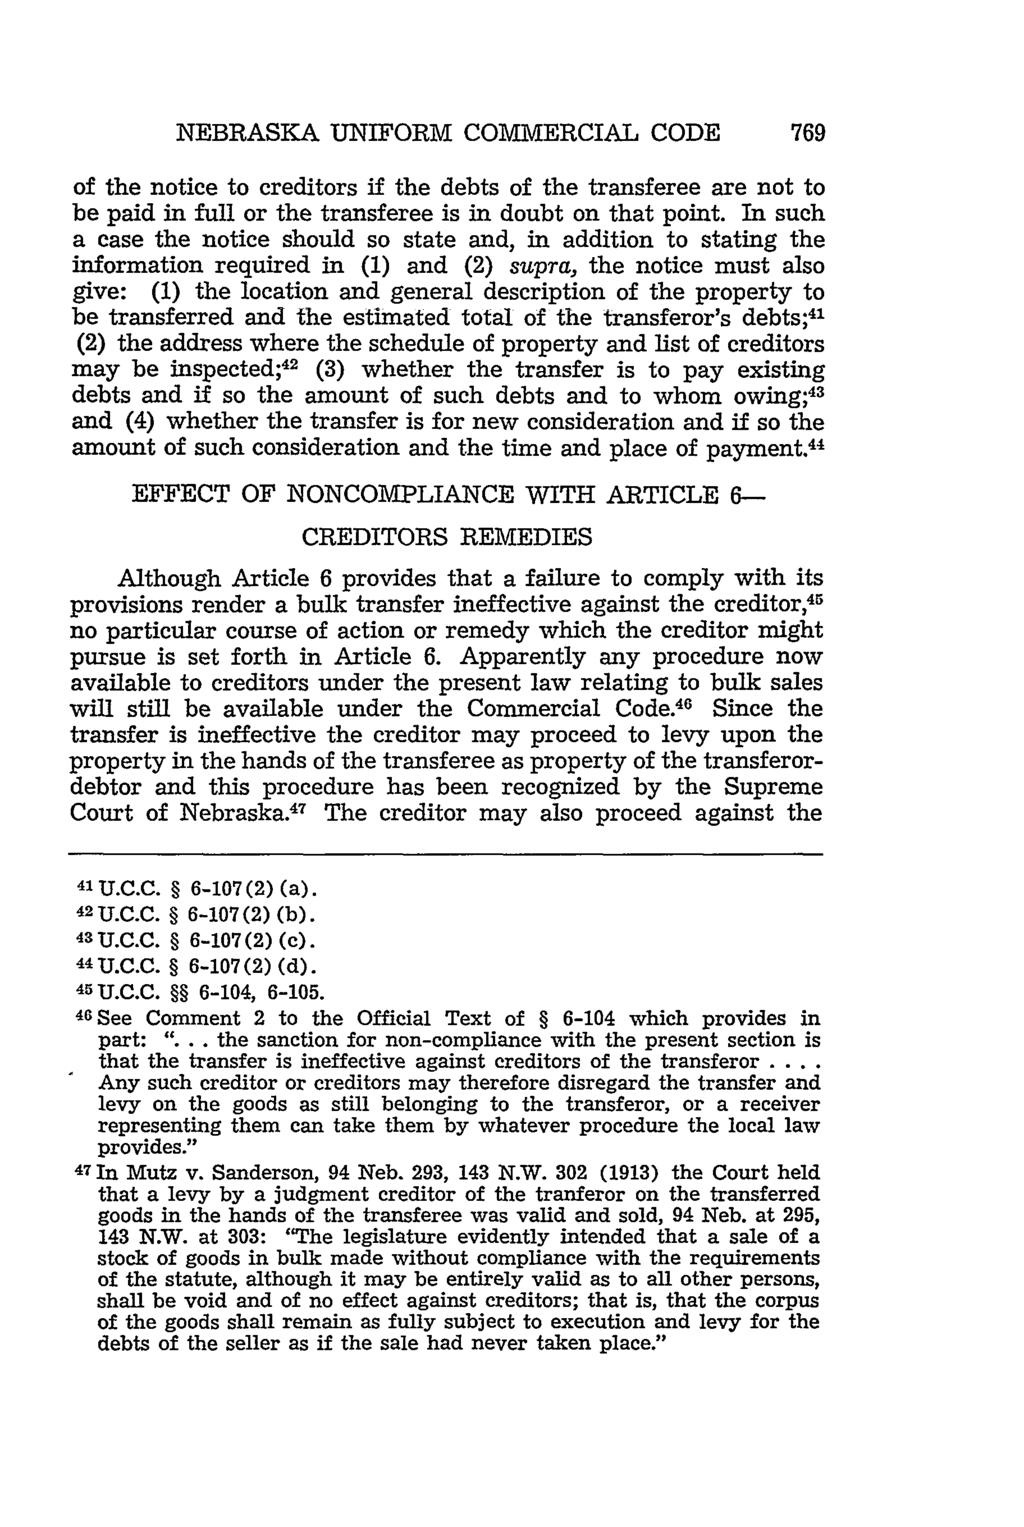 NEBRASKA UNIFORM COMMERCIAL CODE of the notice to creditors if the debts of the transferee are not to be paid in full or the transferee is in doubt on that point.